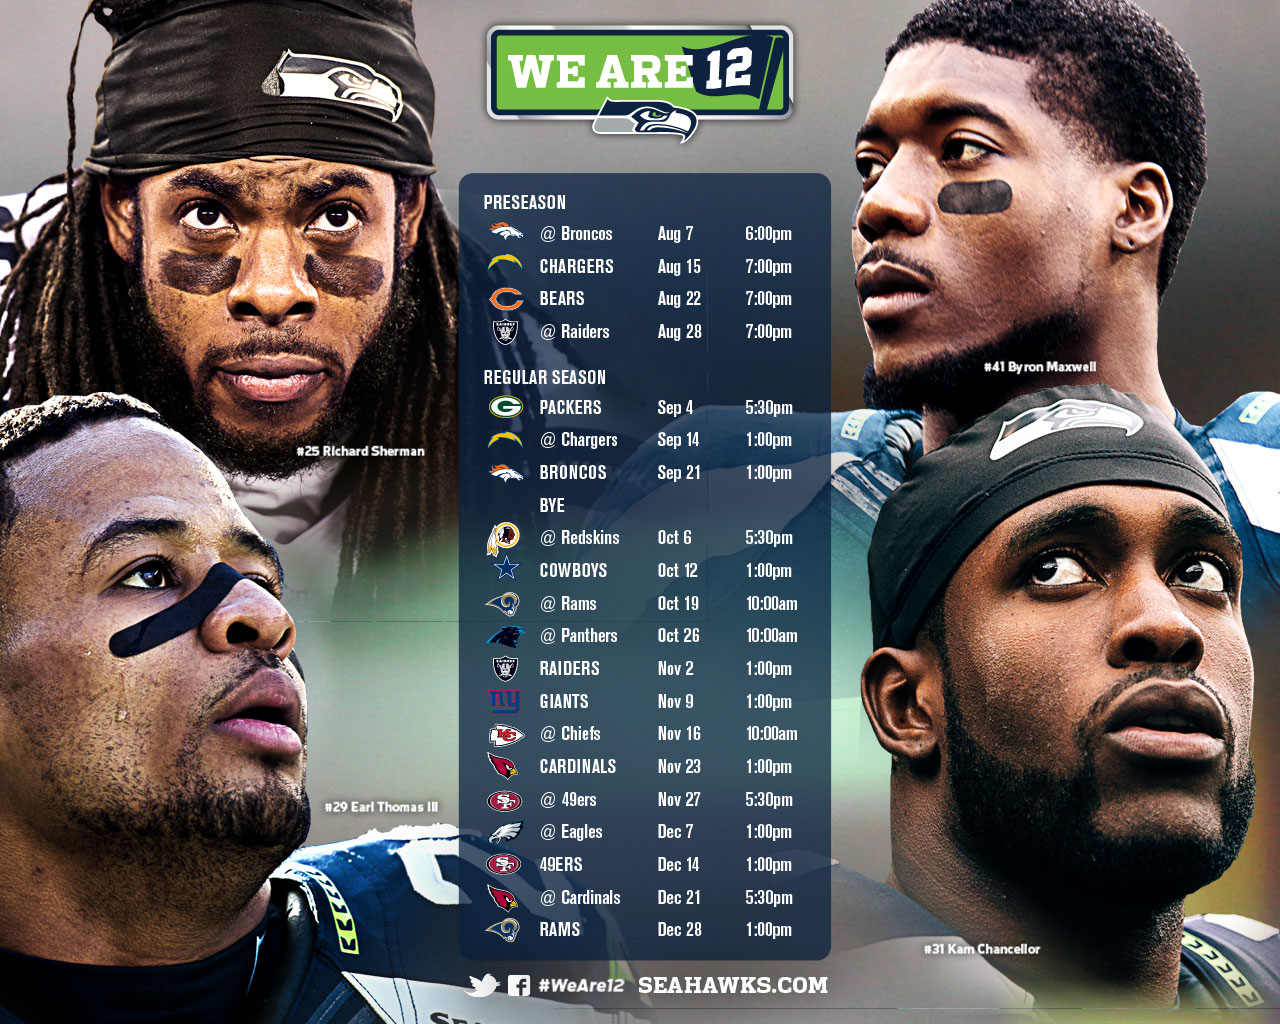 Seahawks Schedule 2015 2016 Search Results Calendar 2015